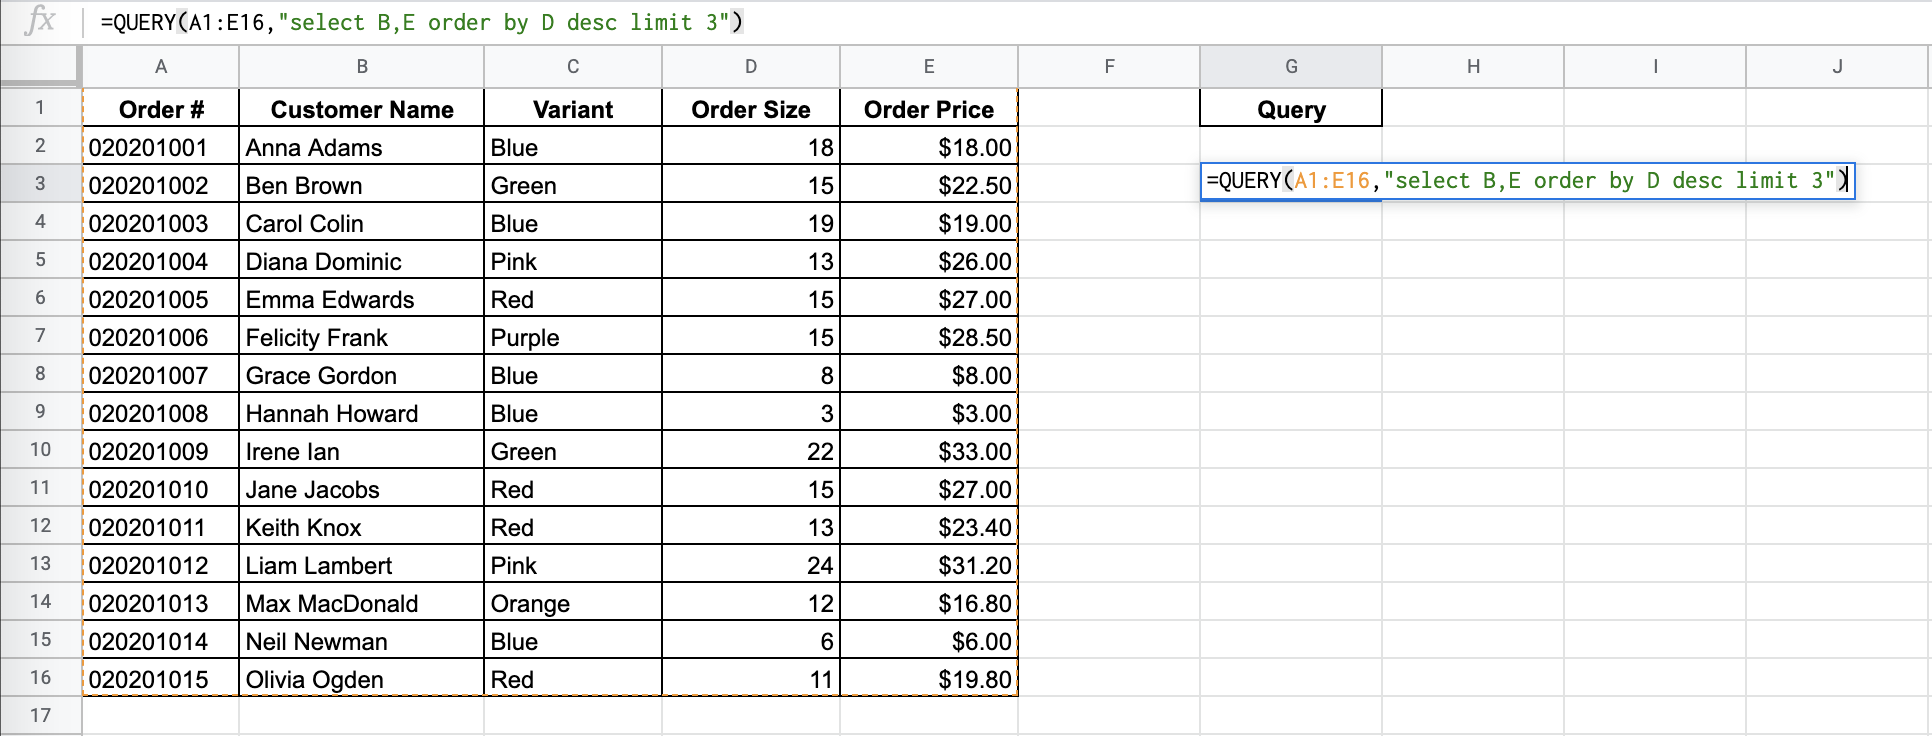 How to Limit Number of Rows in Google Sheets Query